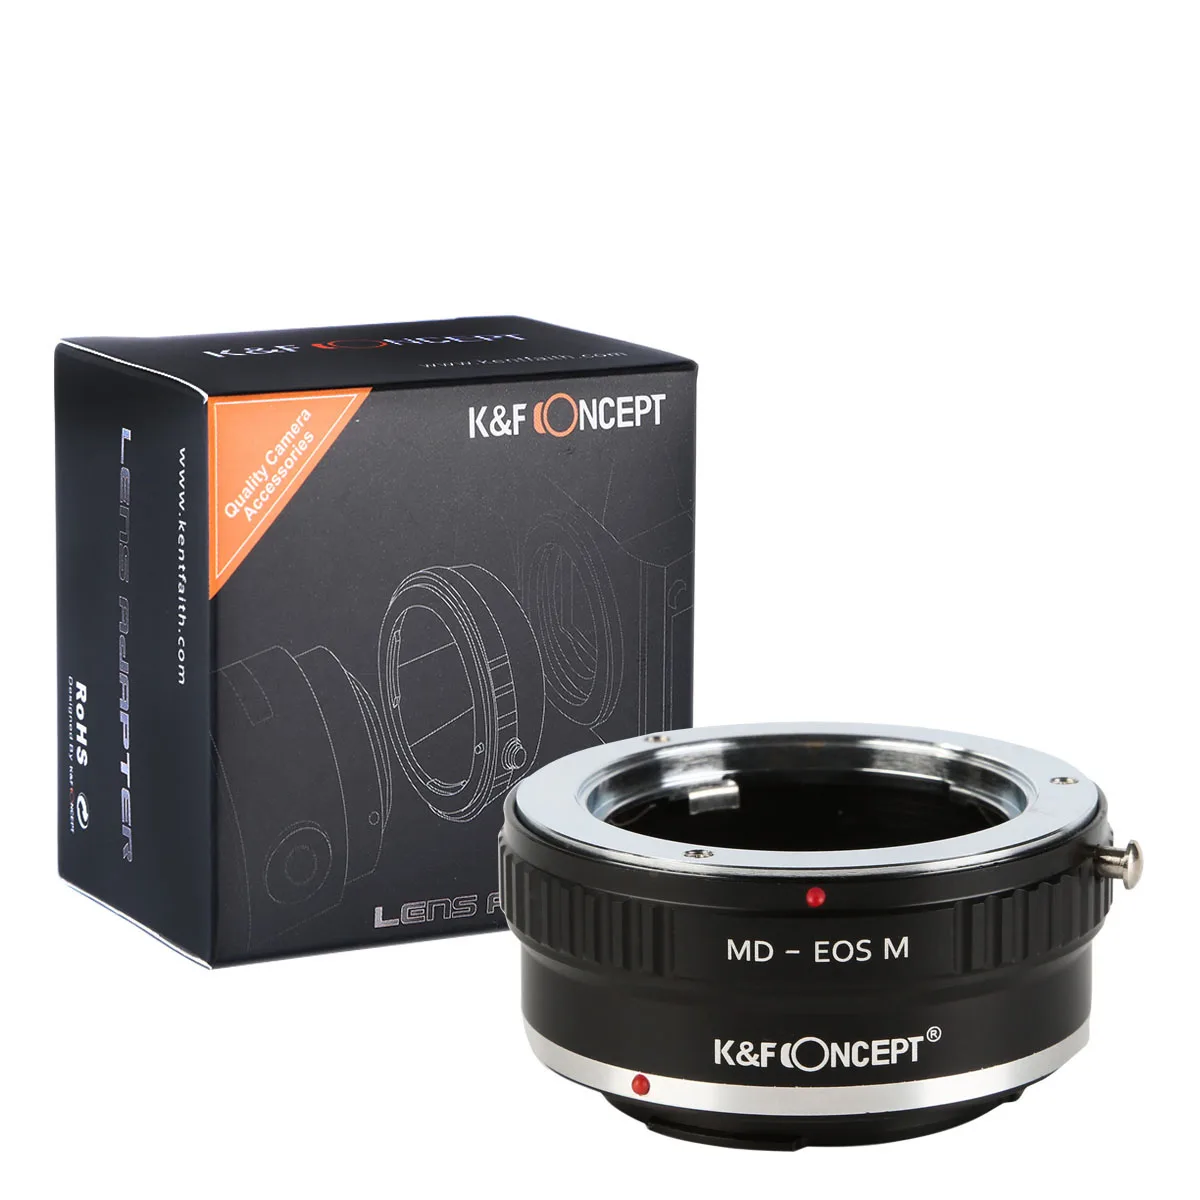 

K&F Concept Lens Adapter for Minolta MD mount lens to Canon EOS M camera M1 M2 M3 M5 M6 M50 M100